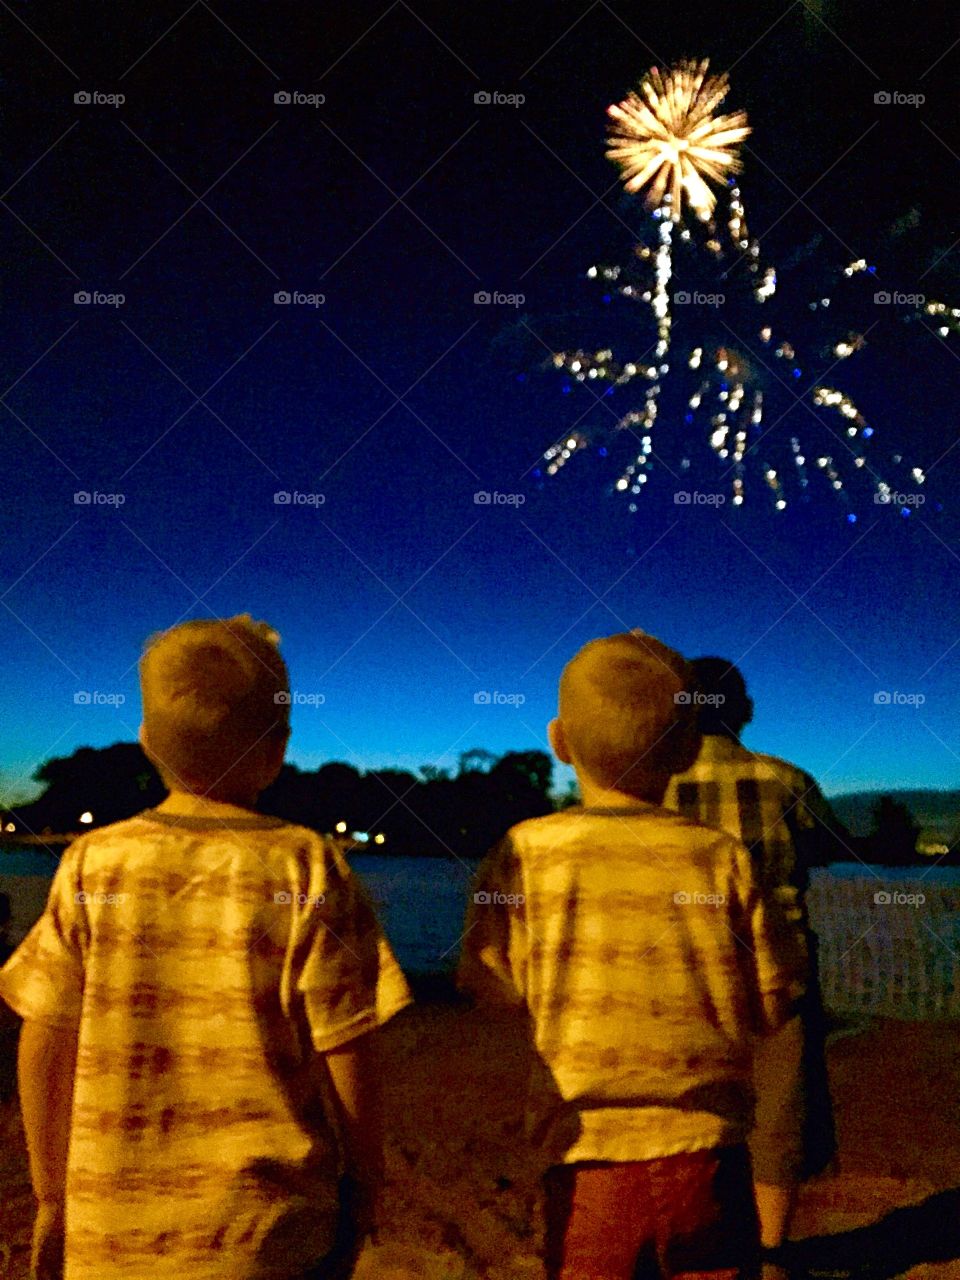 Magic of childhood . Kids being wooed by fireworks. Looks like a wand waving over them